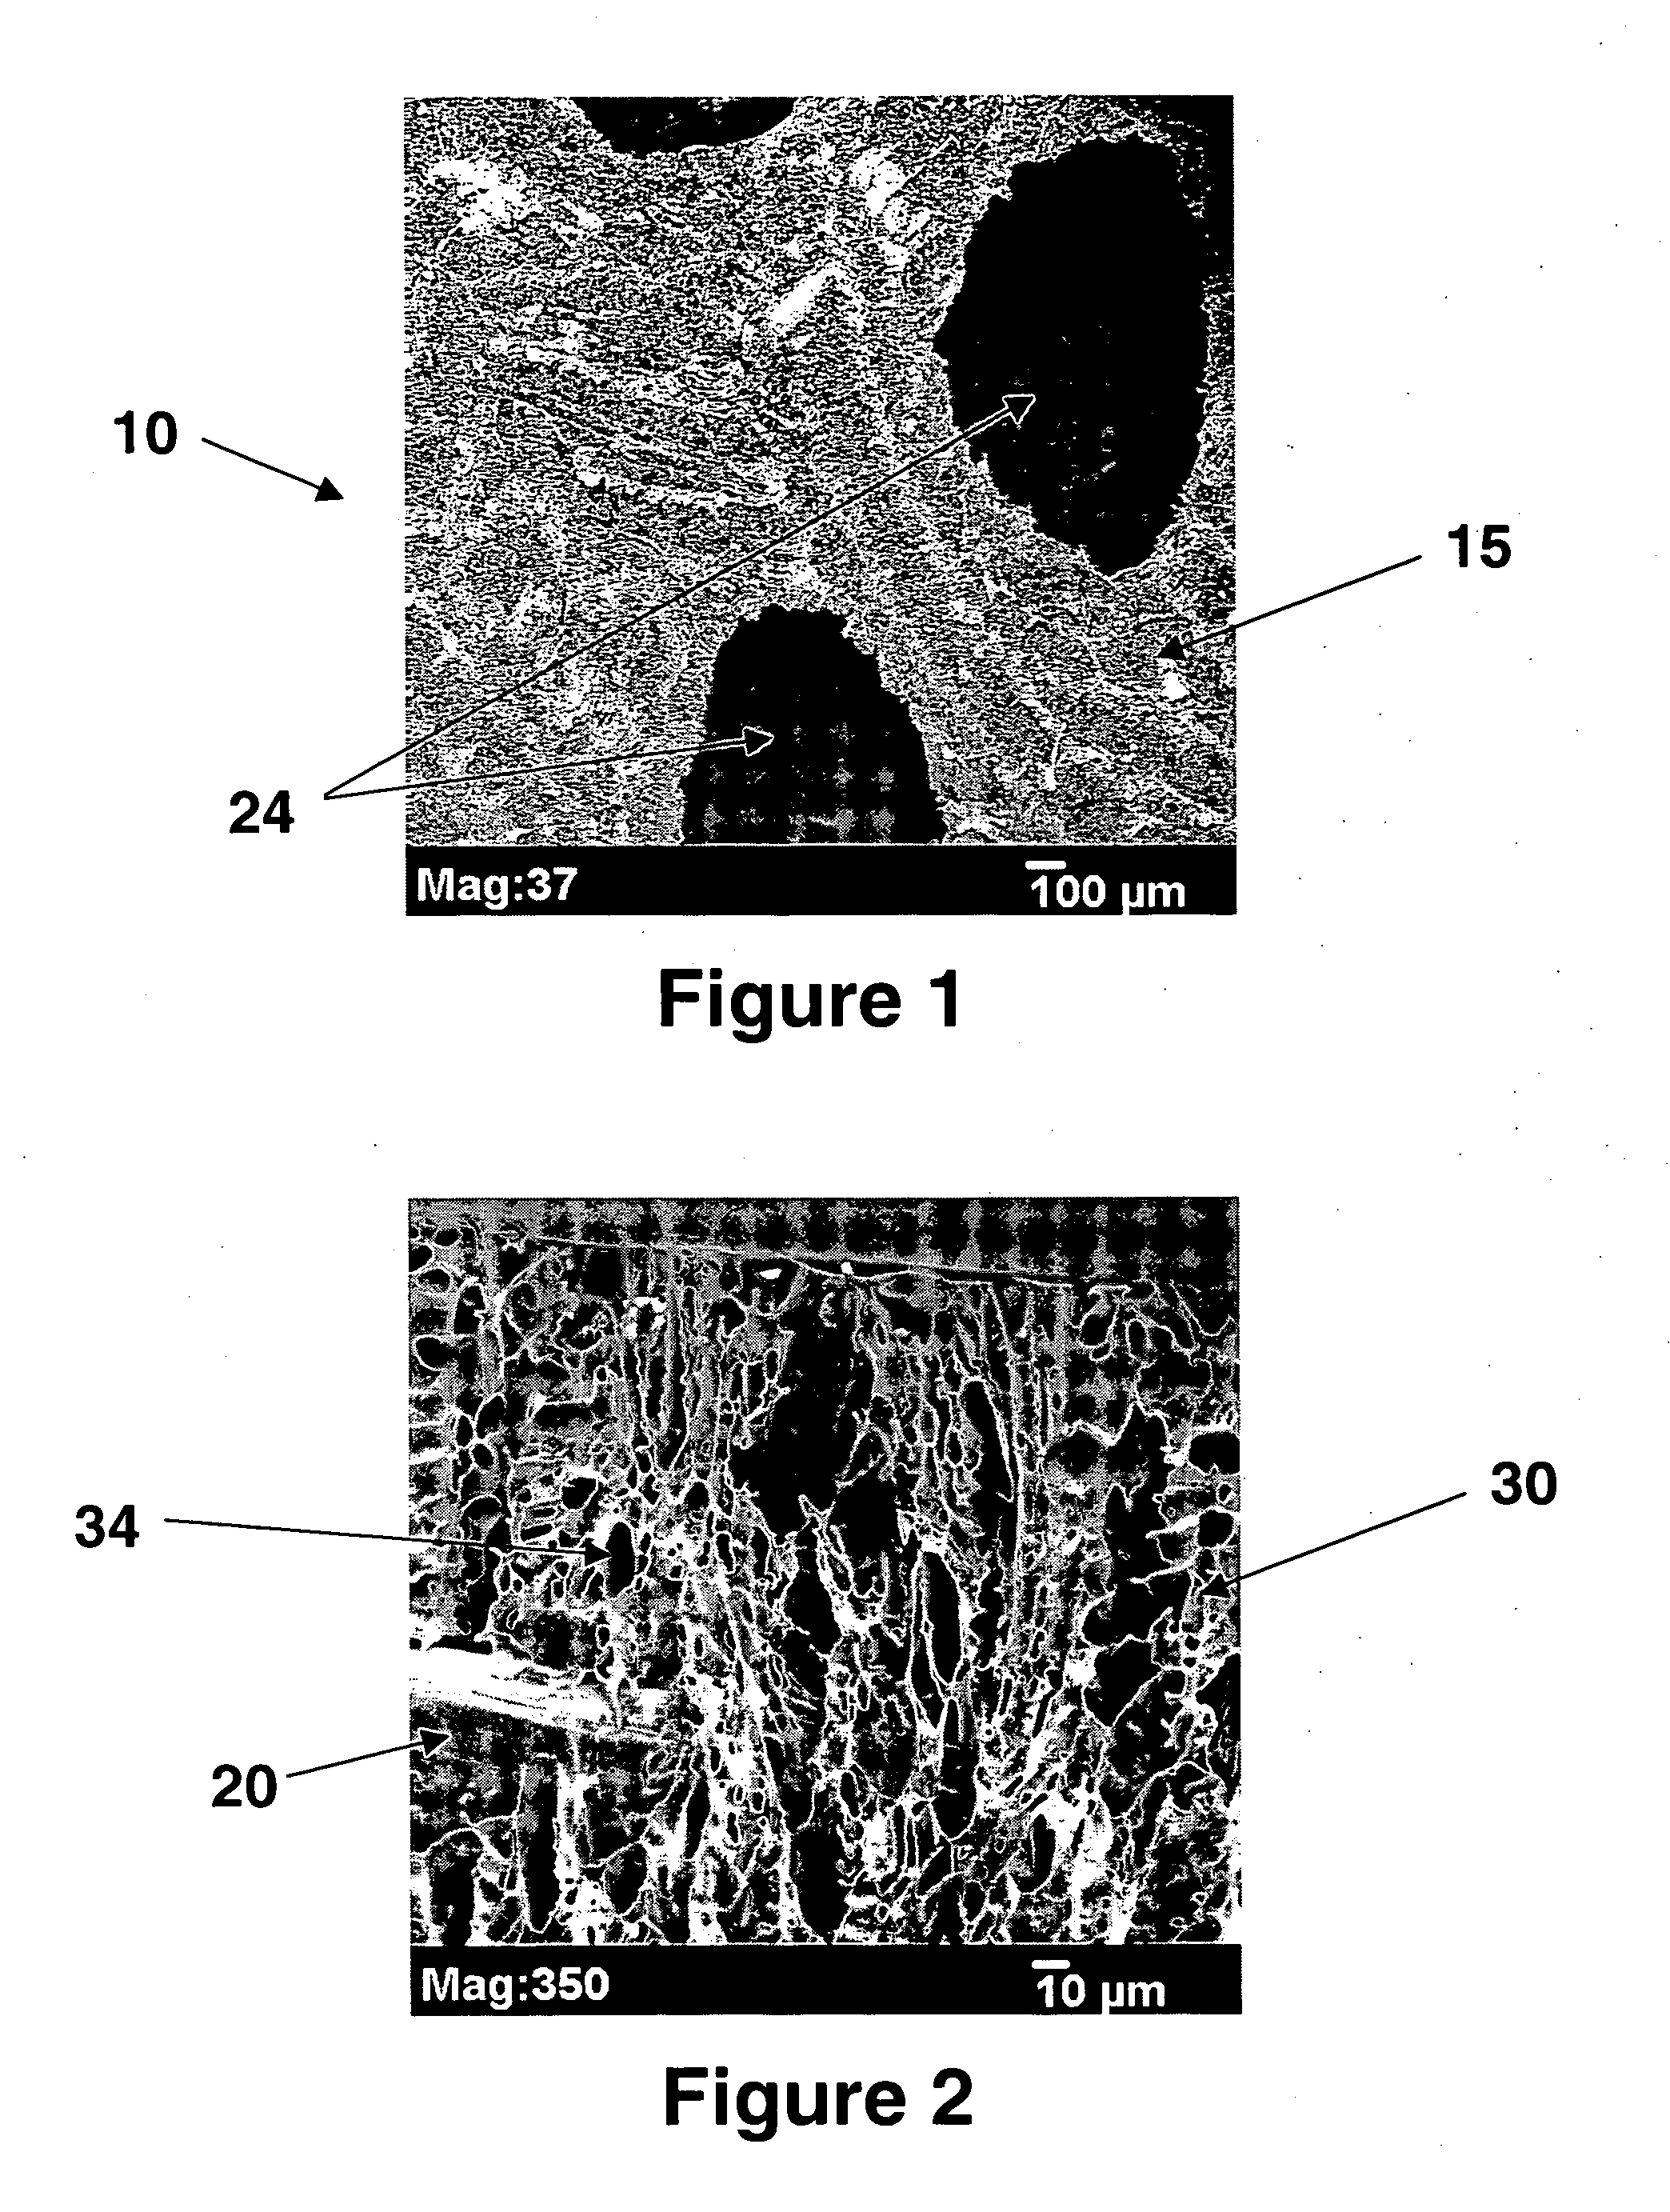 Device for tissue reinforcement having microporous and macroporous structures